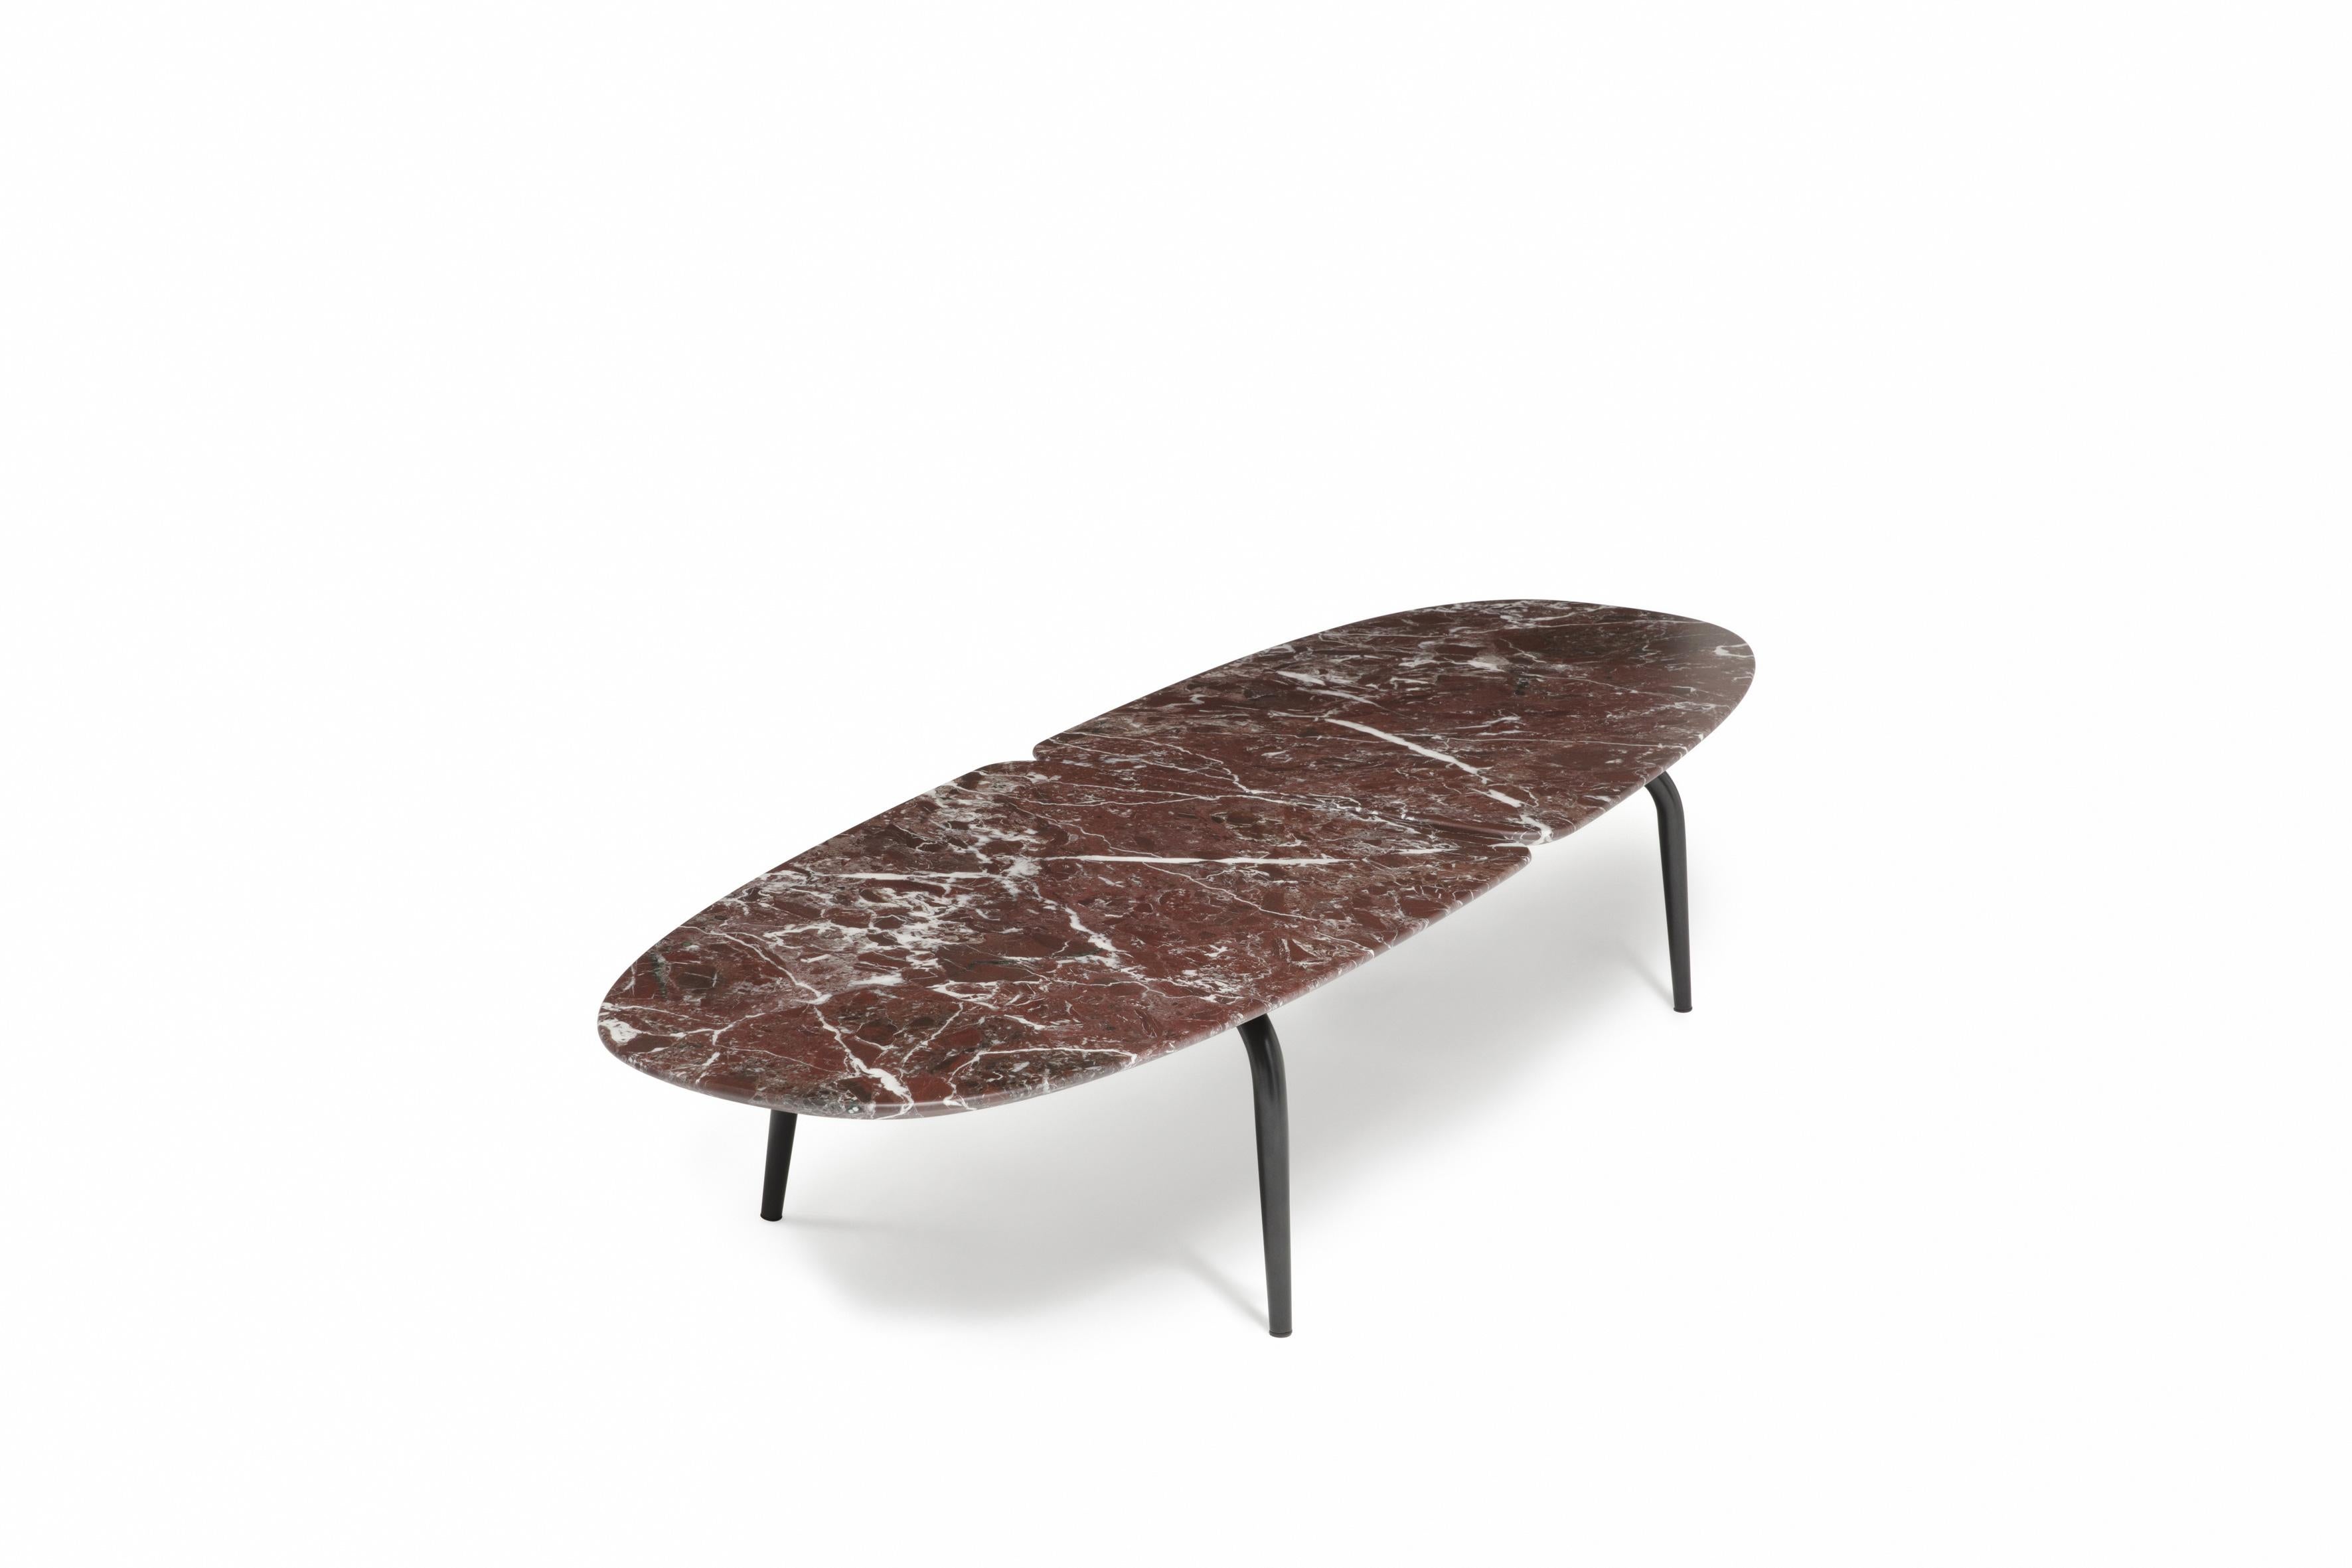 Zanotta Graphium Small Table in Red Lepanto Marble Top with Black Steel Frame by Garcia Cumini

Black varnished steel frame. Tops available either in grey Calacatta marble, in red Lepanto marble or in Sahara Noir marble with stain-resistant